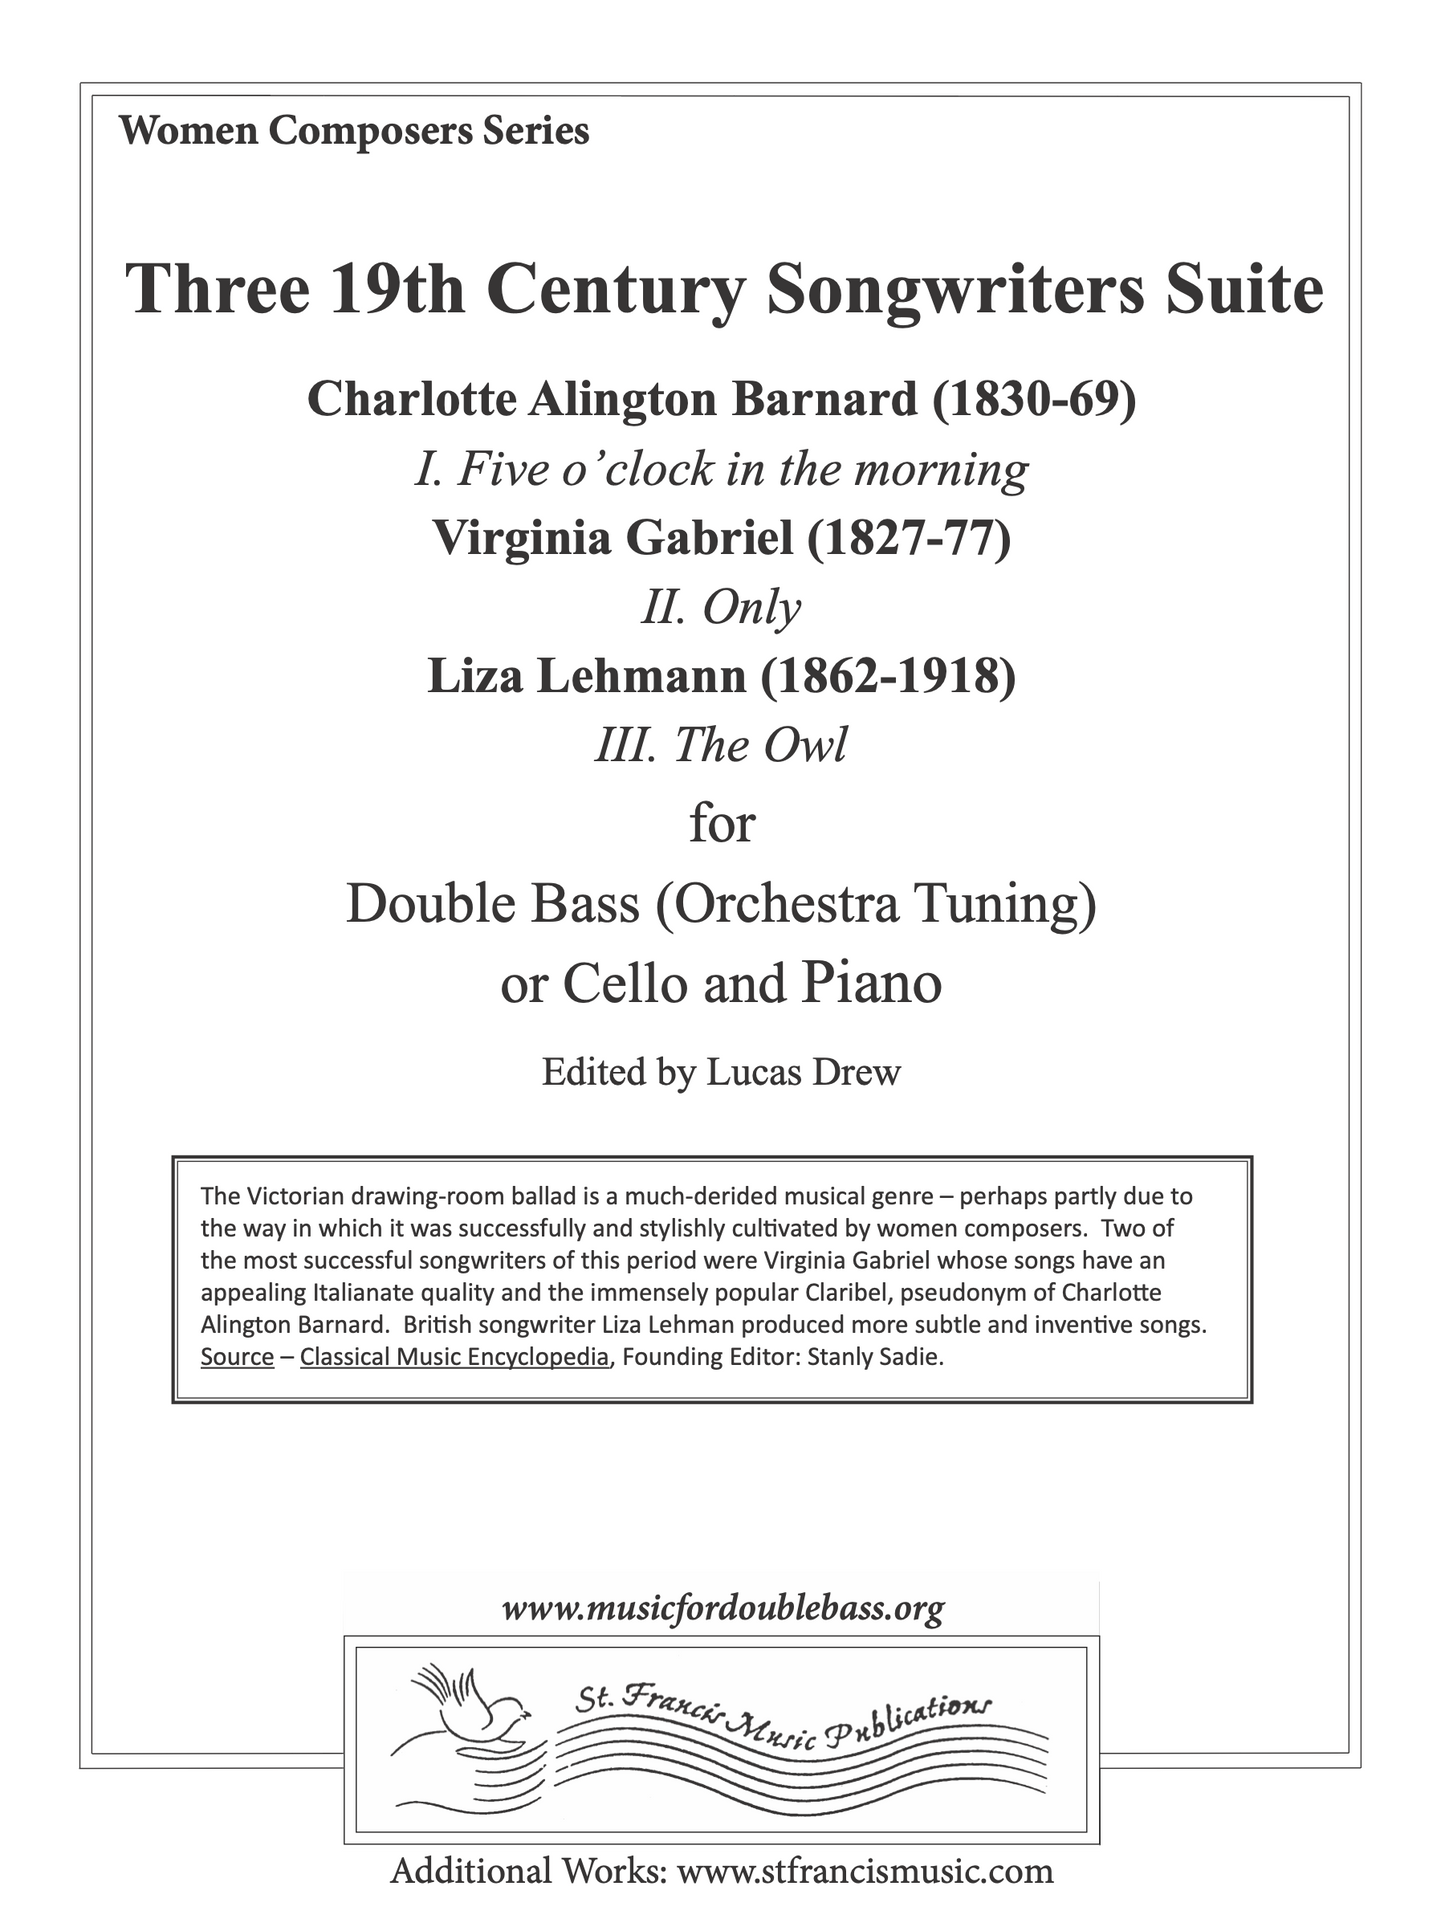 Three 19th Century Songwriters Suite for double bass and piano (ed. Lucas Drew)